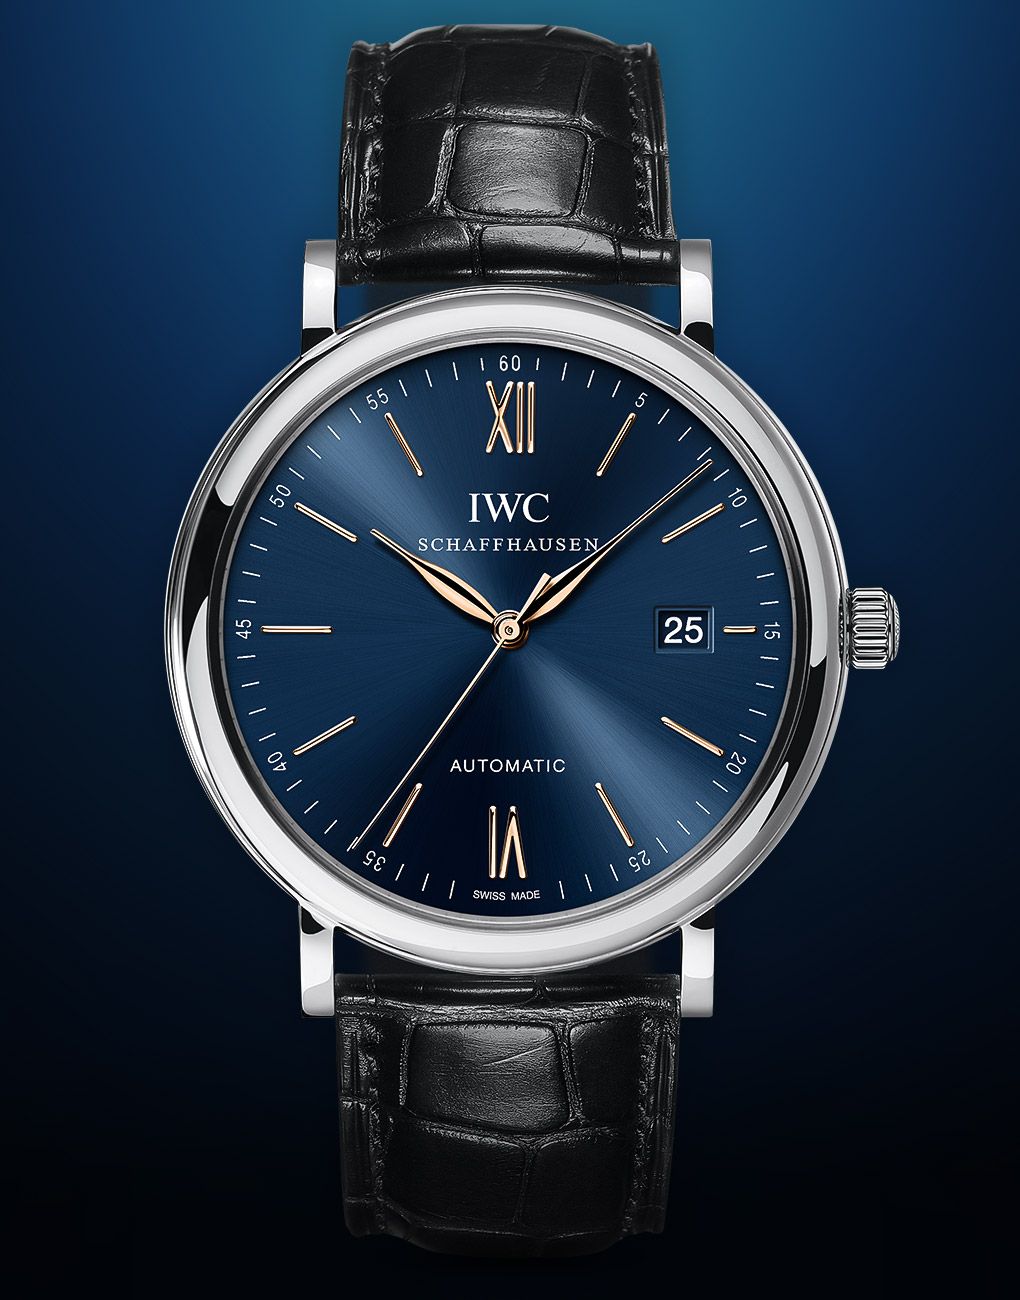 Interview: IWC’s Creative Director On The New Ingenieur And The Brand